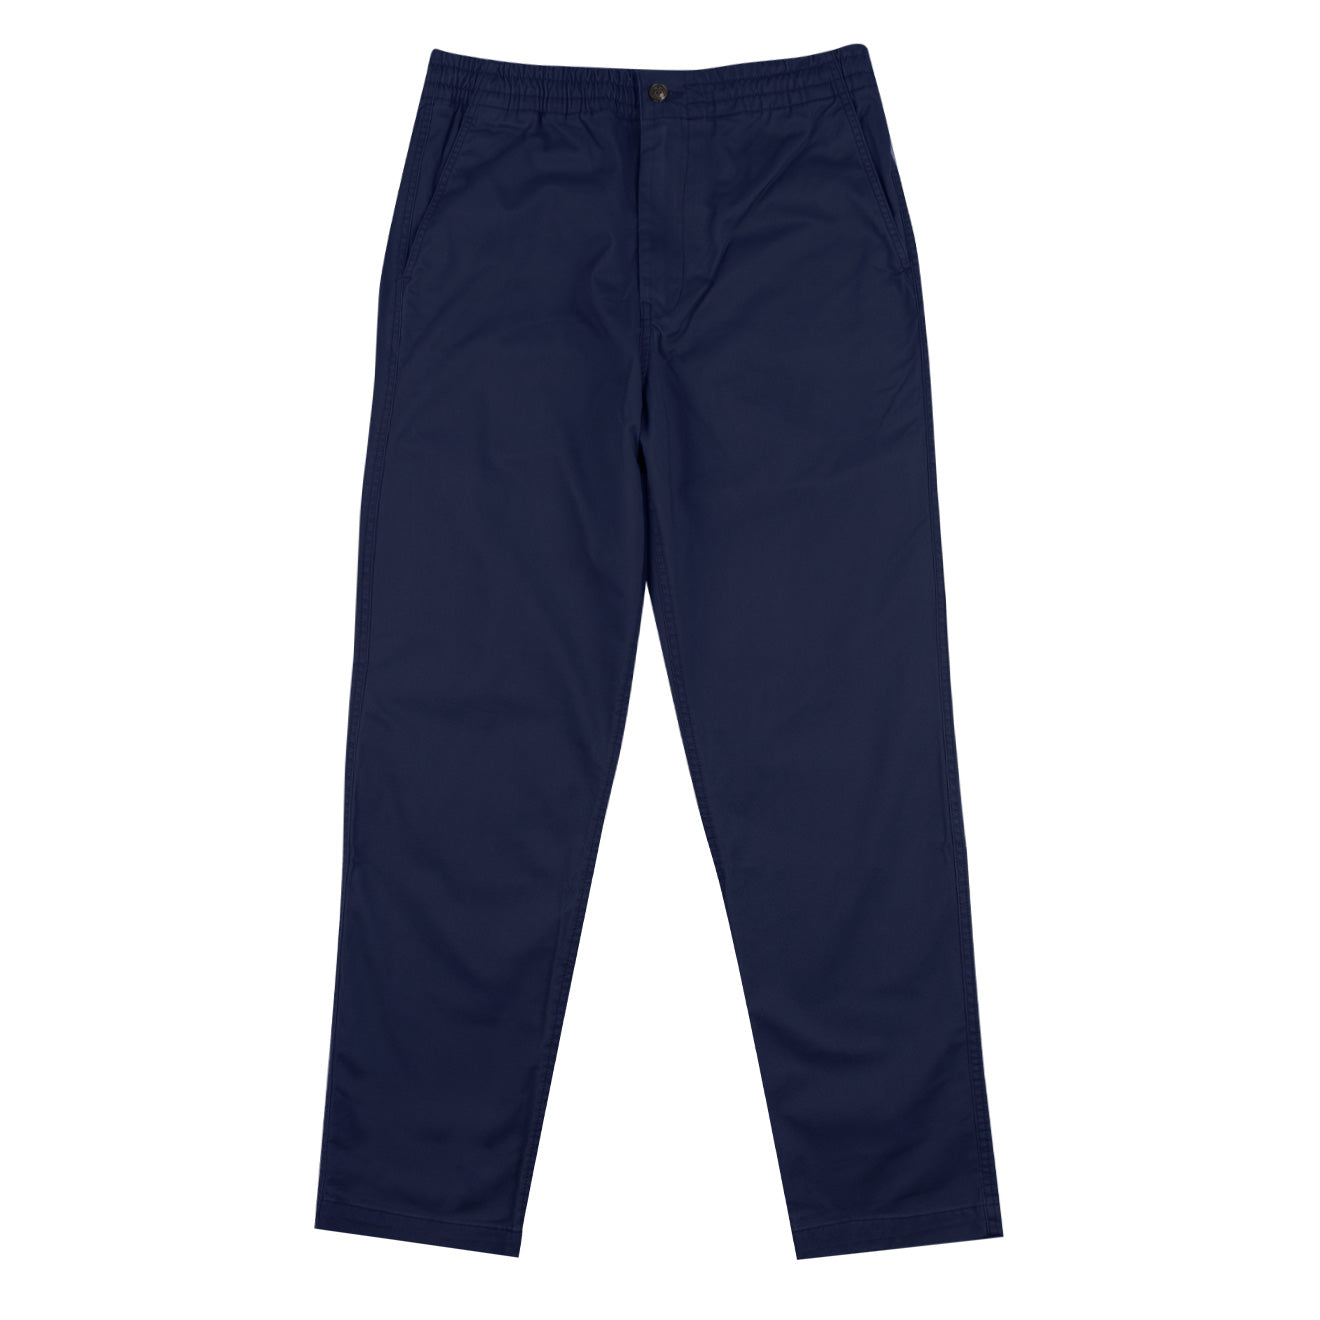 Polo Ralph Lauren Flat Front Stretch Twill Chino Newport Navy | The ...